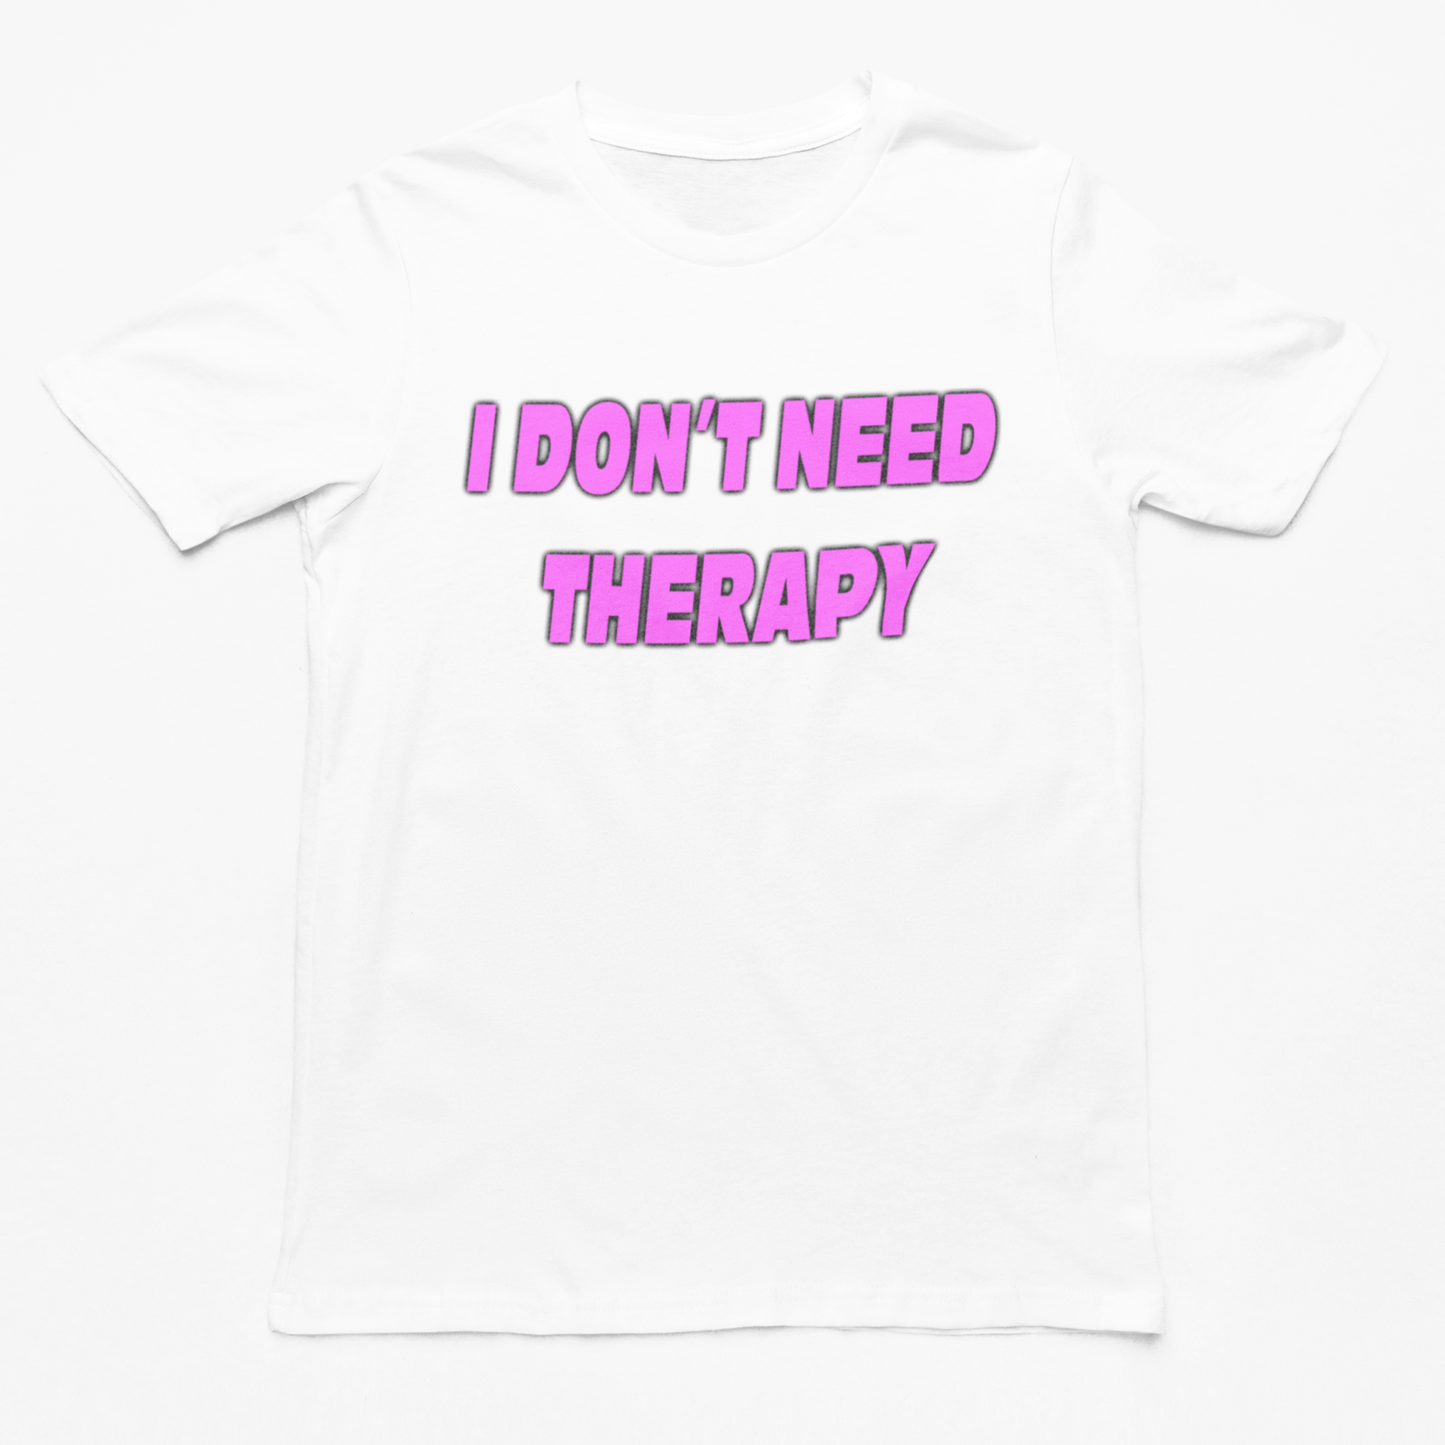 I Don't Need Therapy t-shirt